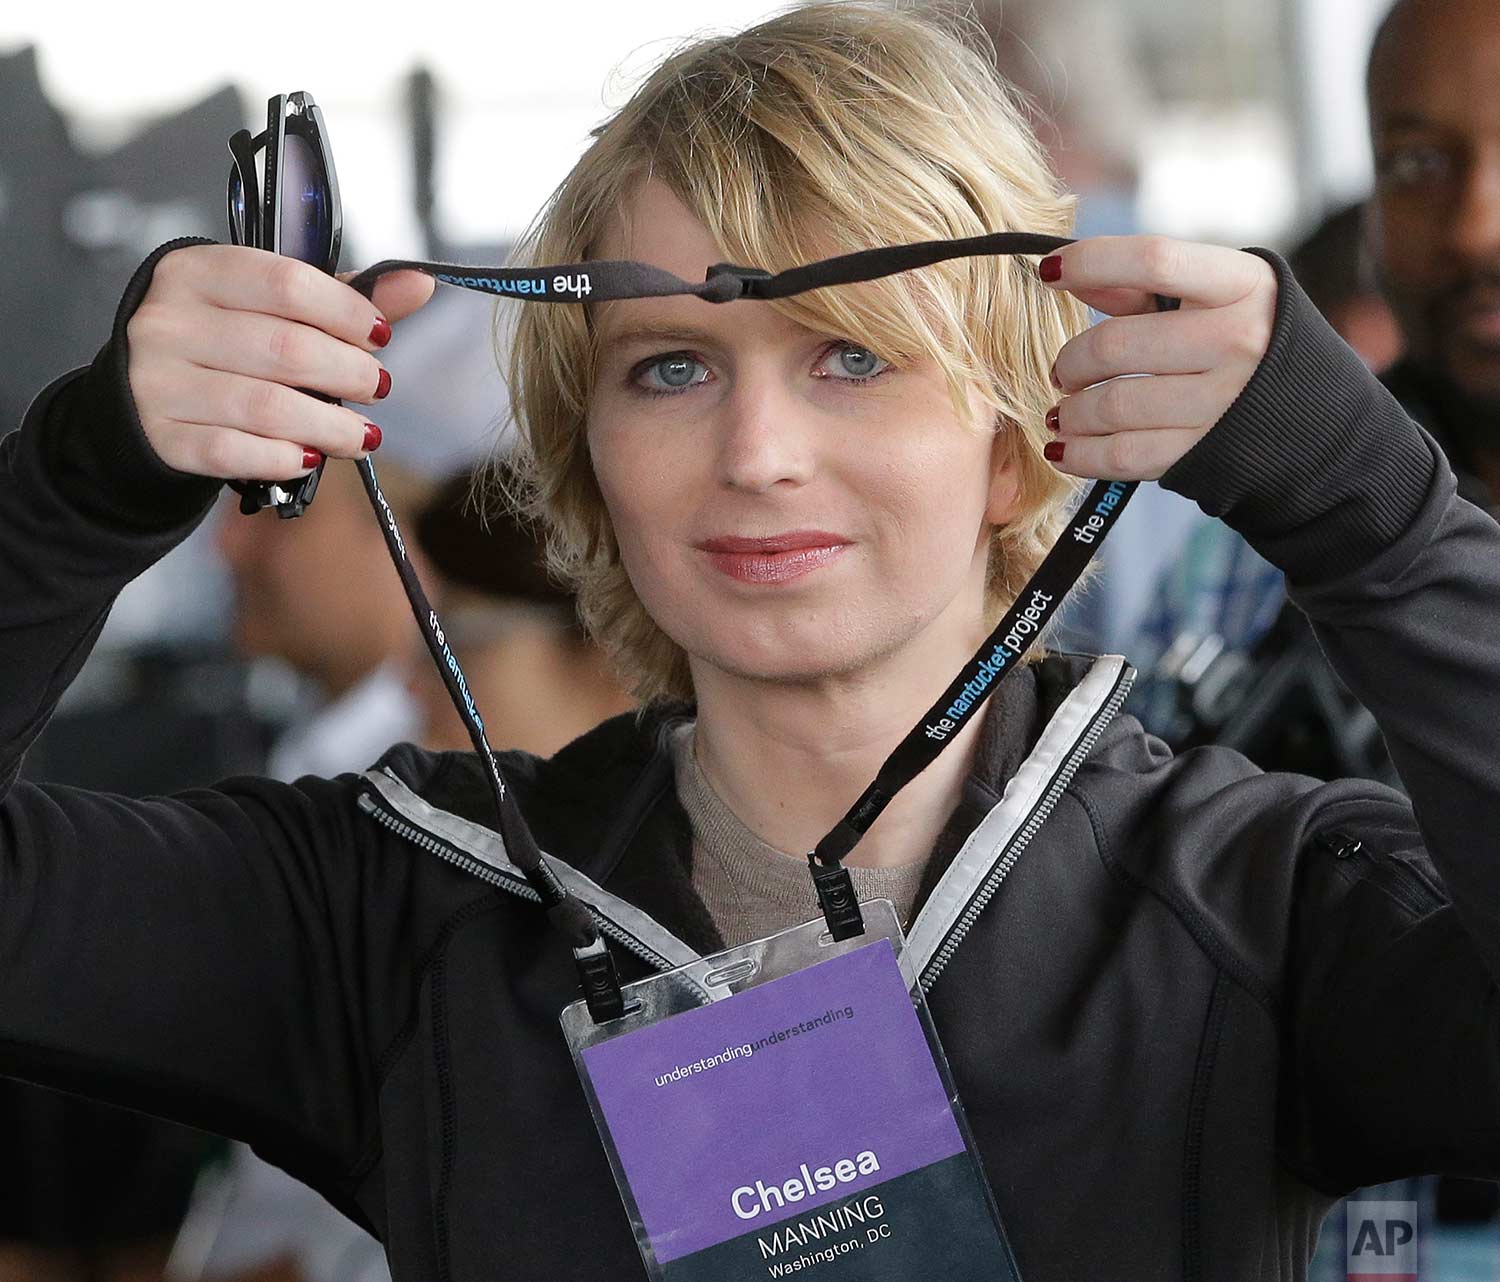  Chelsea Manning puts on a name tag before an appearance at a forum Sunday, Sept. 17, 2017, in Nantucket, Mass. The appearance at the forum is part of The Nantucket Project's annual gathering on the island of Nantucket. Manning is a former U.S. Army 